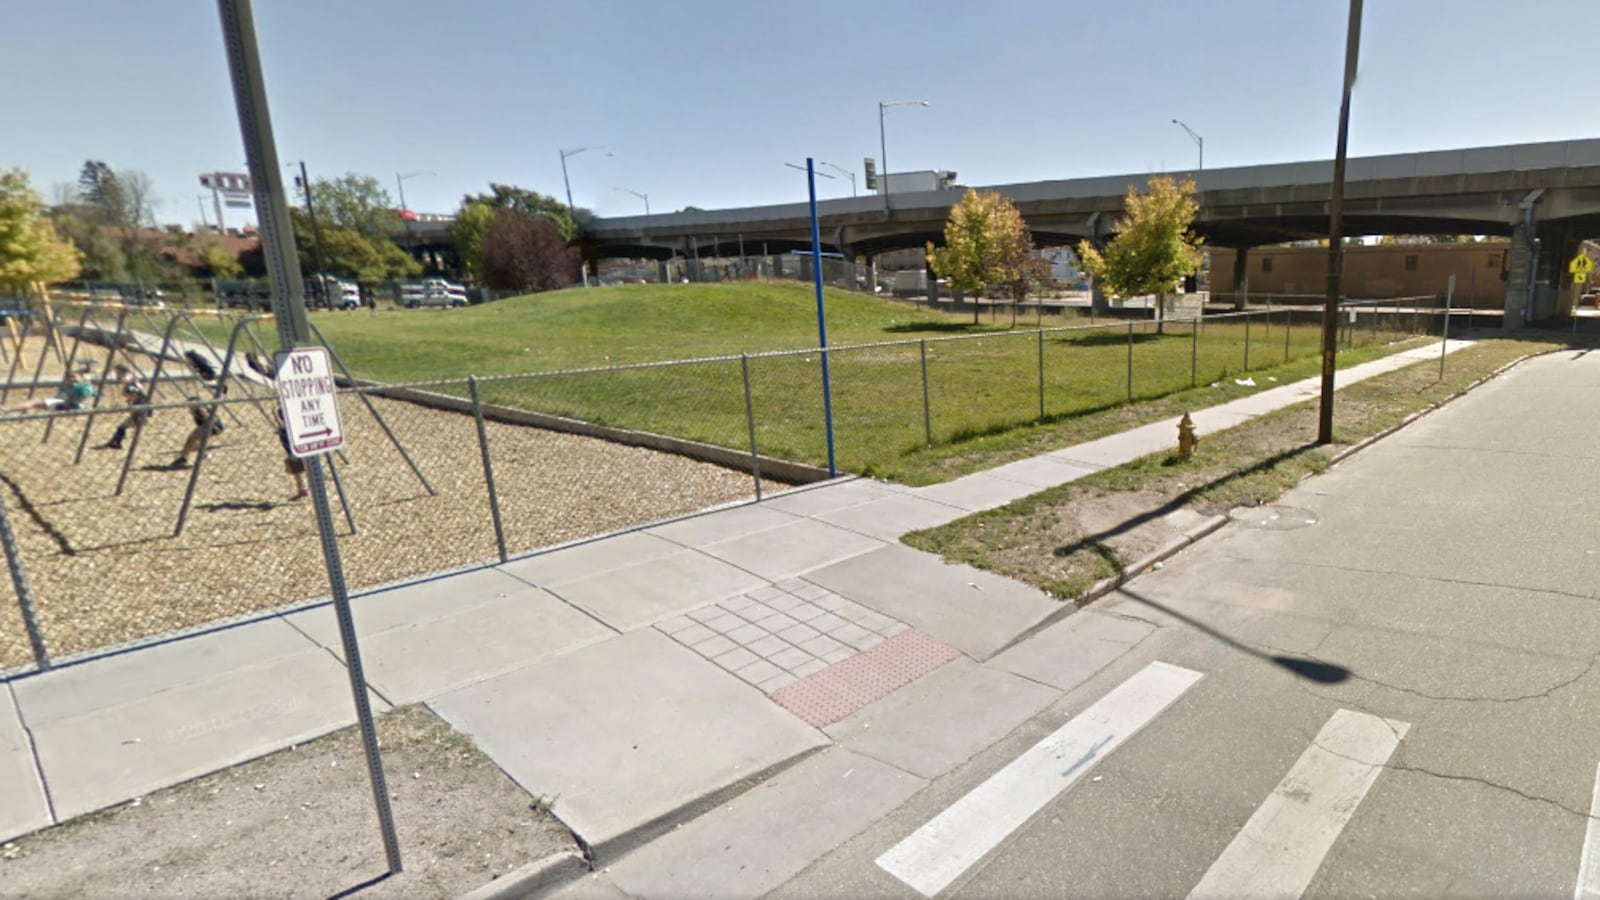 Interstate 70 is clearly visible from the playground outside Swansea Elementary School in Denver.